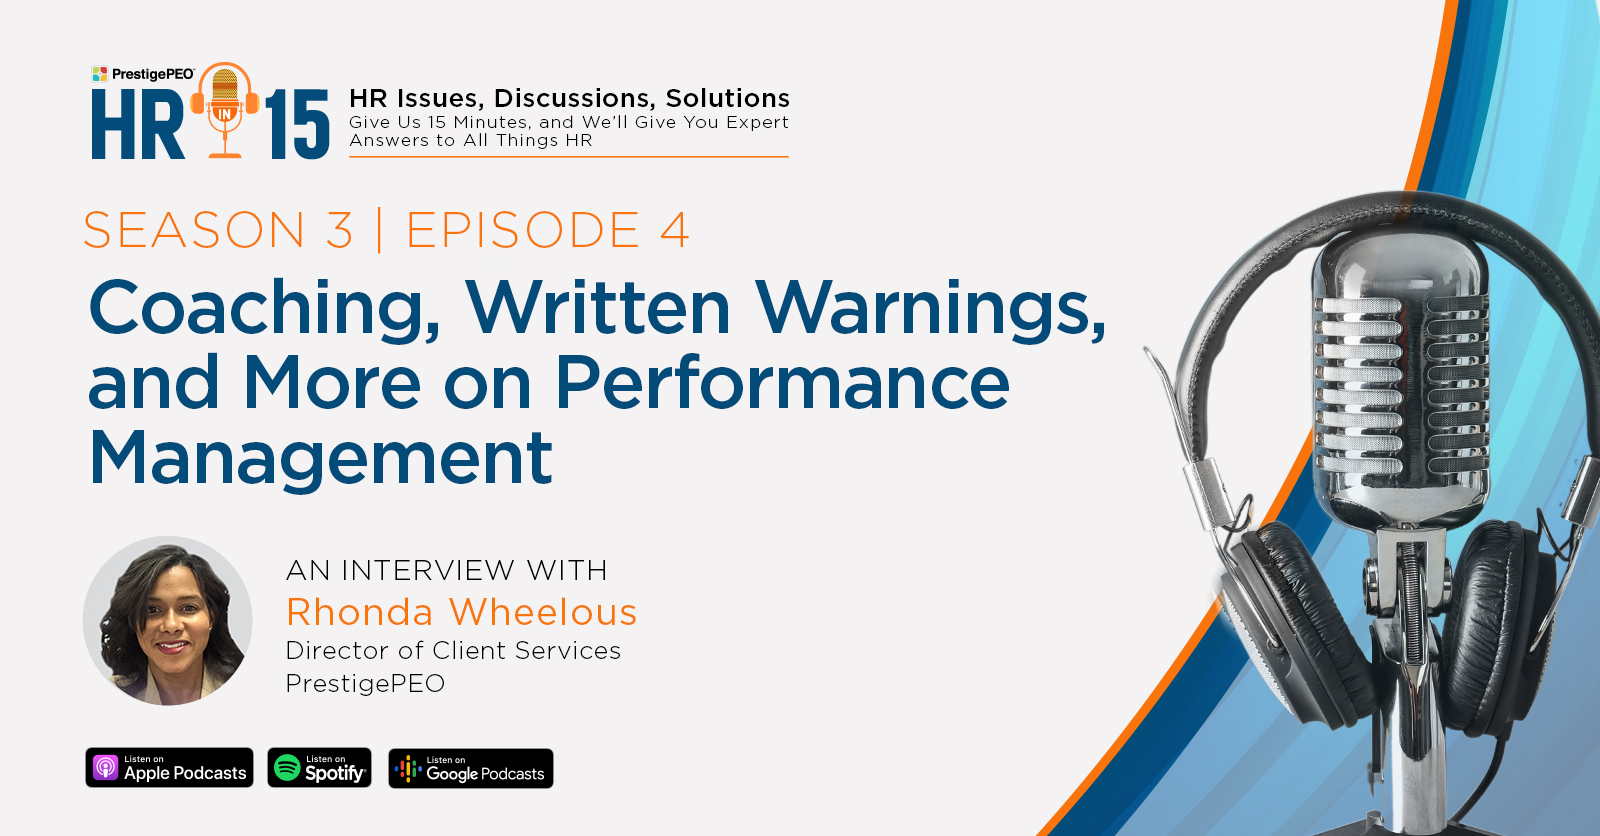 HR-in-15 Interview with Rhonda Wheelous: Coaching, written warnings, and more on performance management